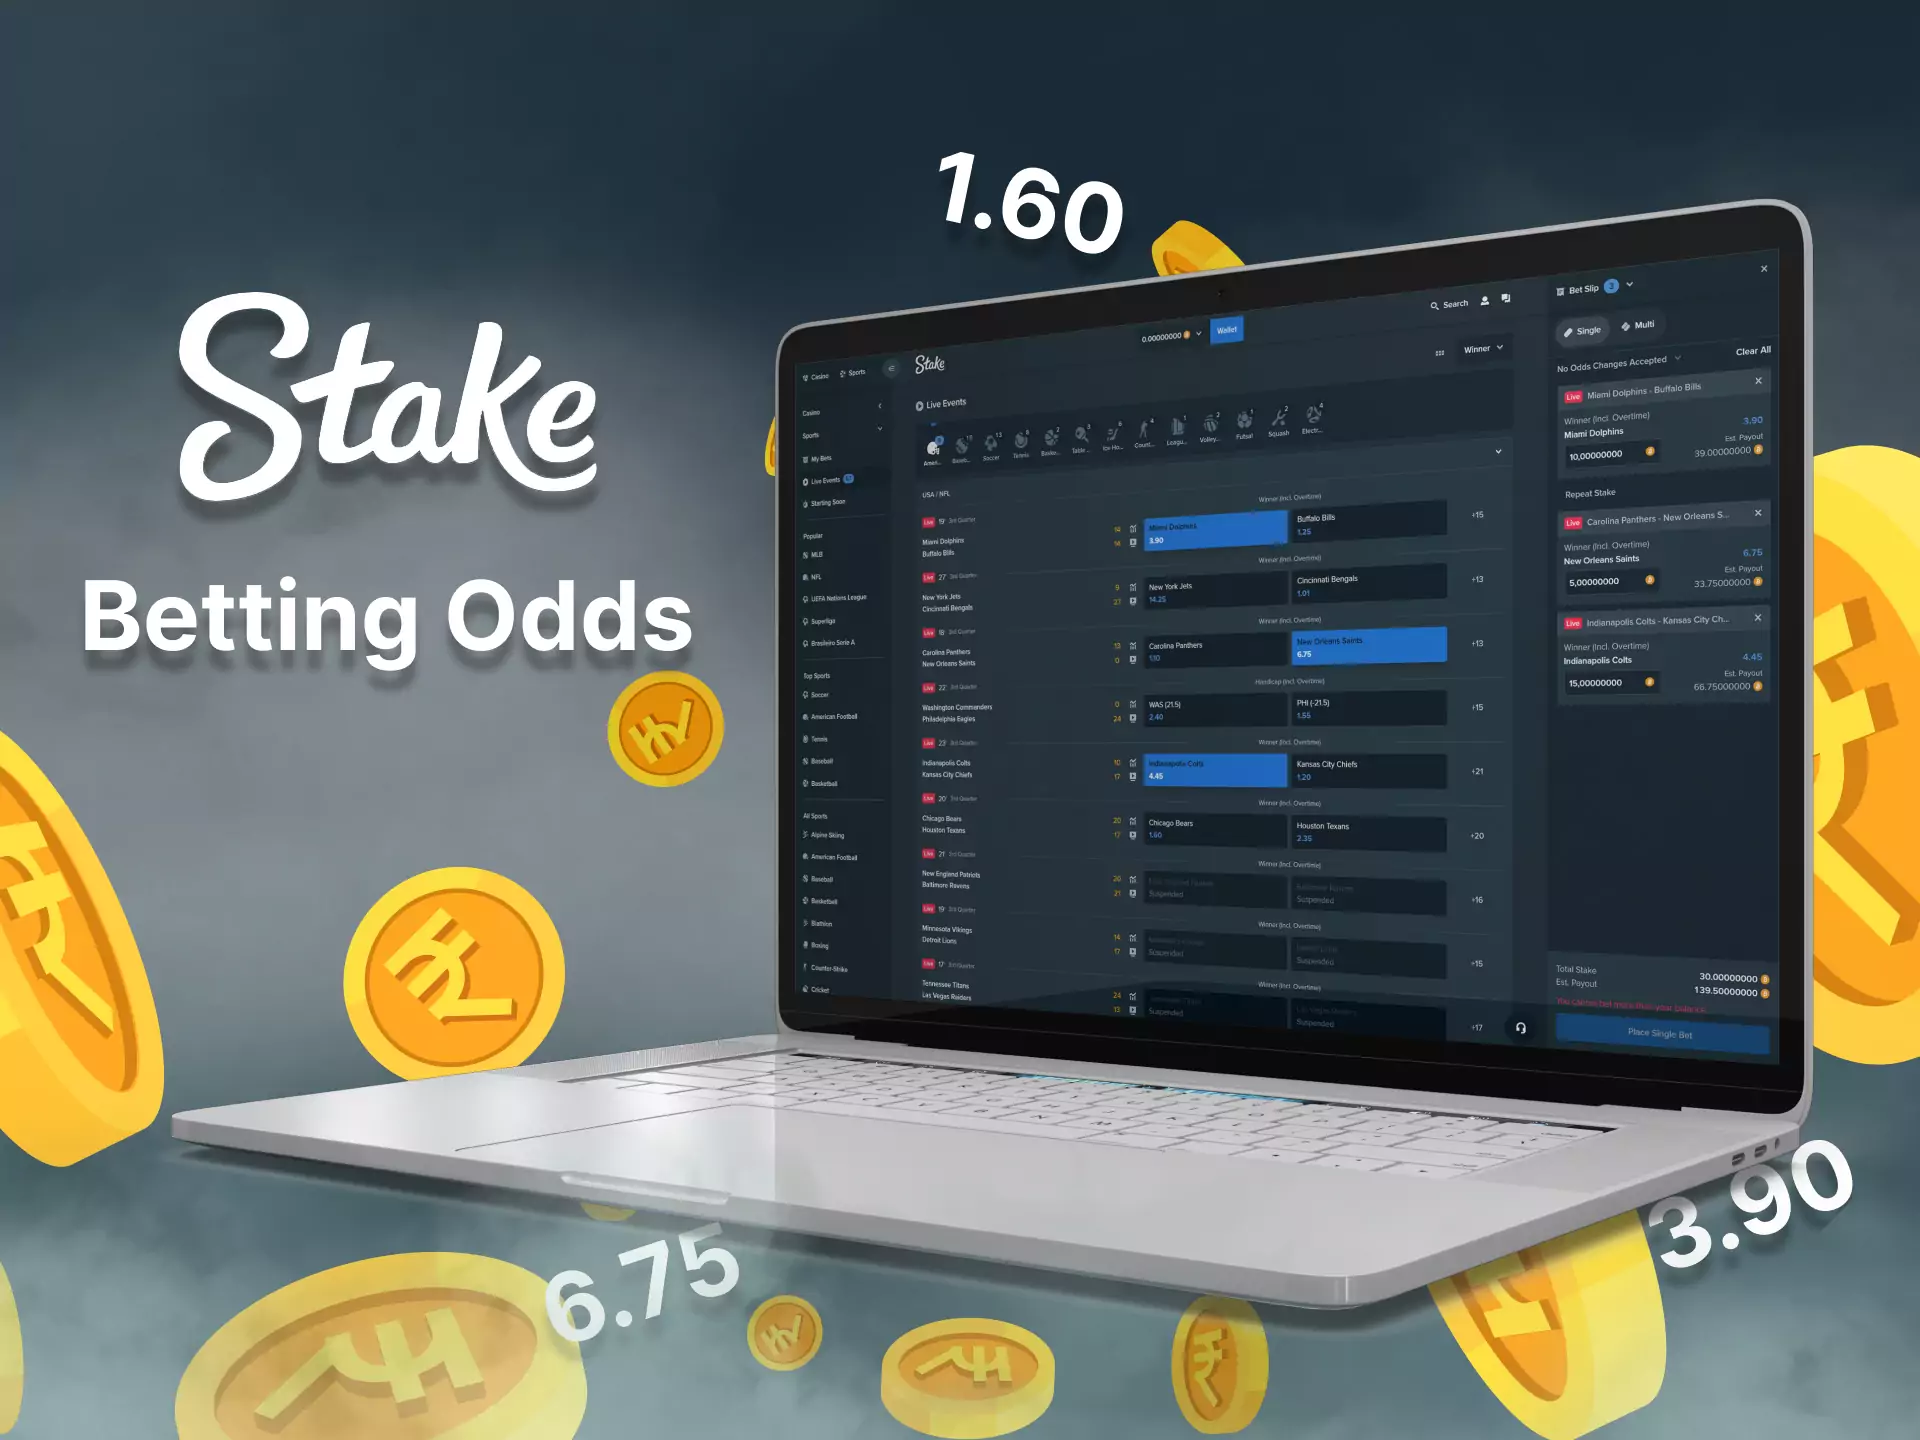 On the Stake website, you can bet with profitable odds on cricket and other sports matches.